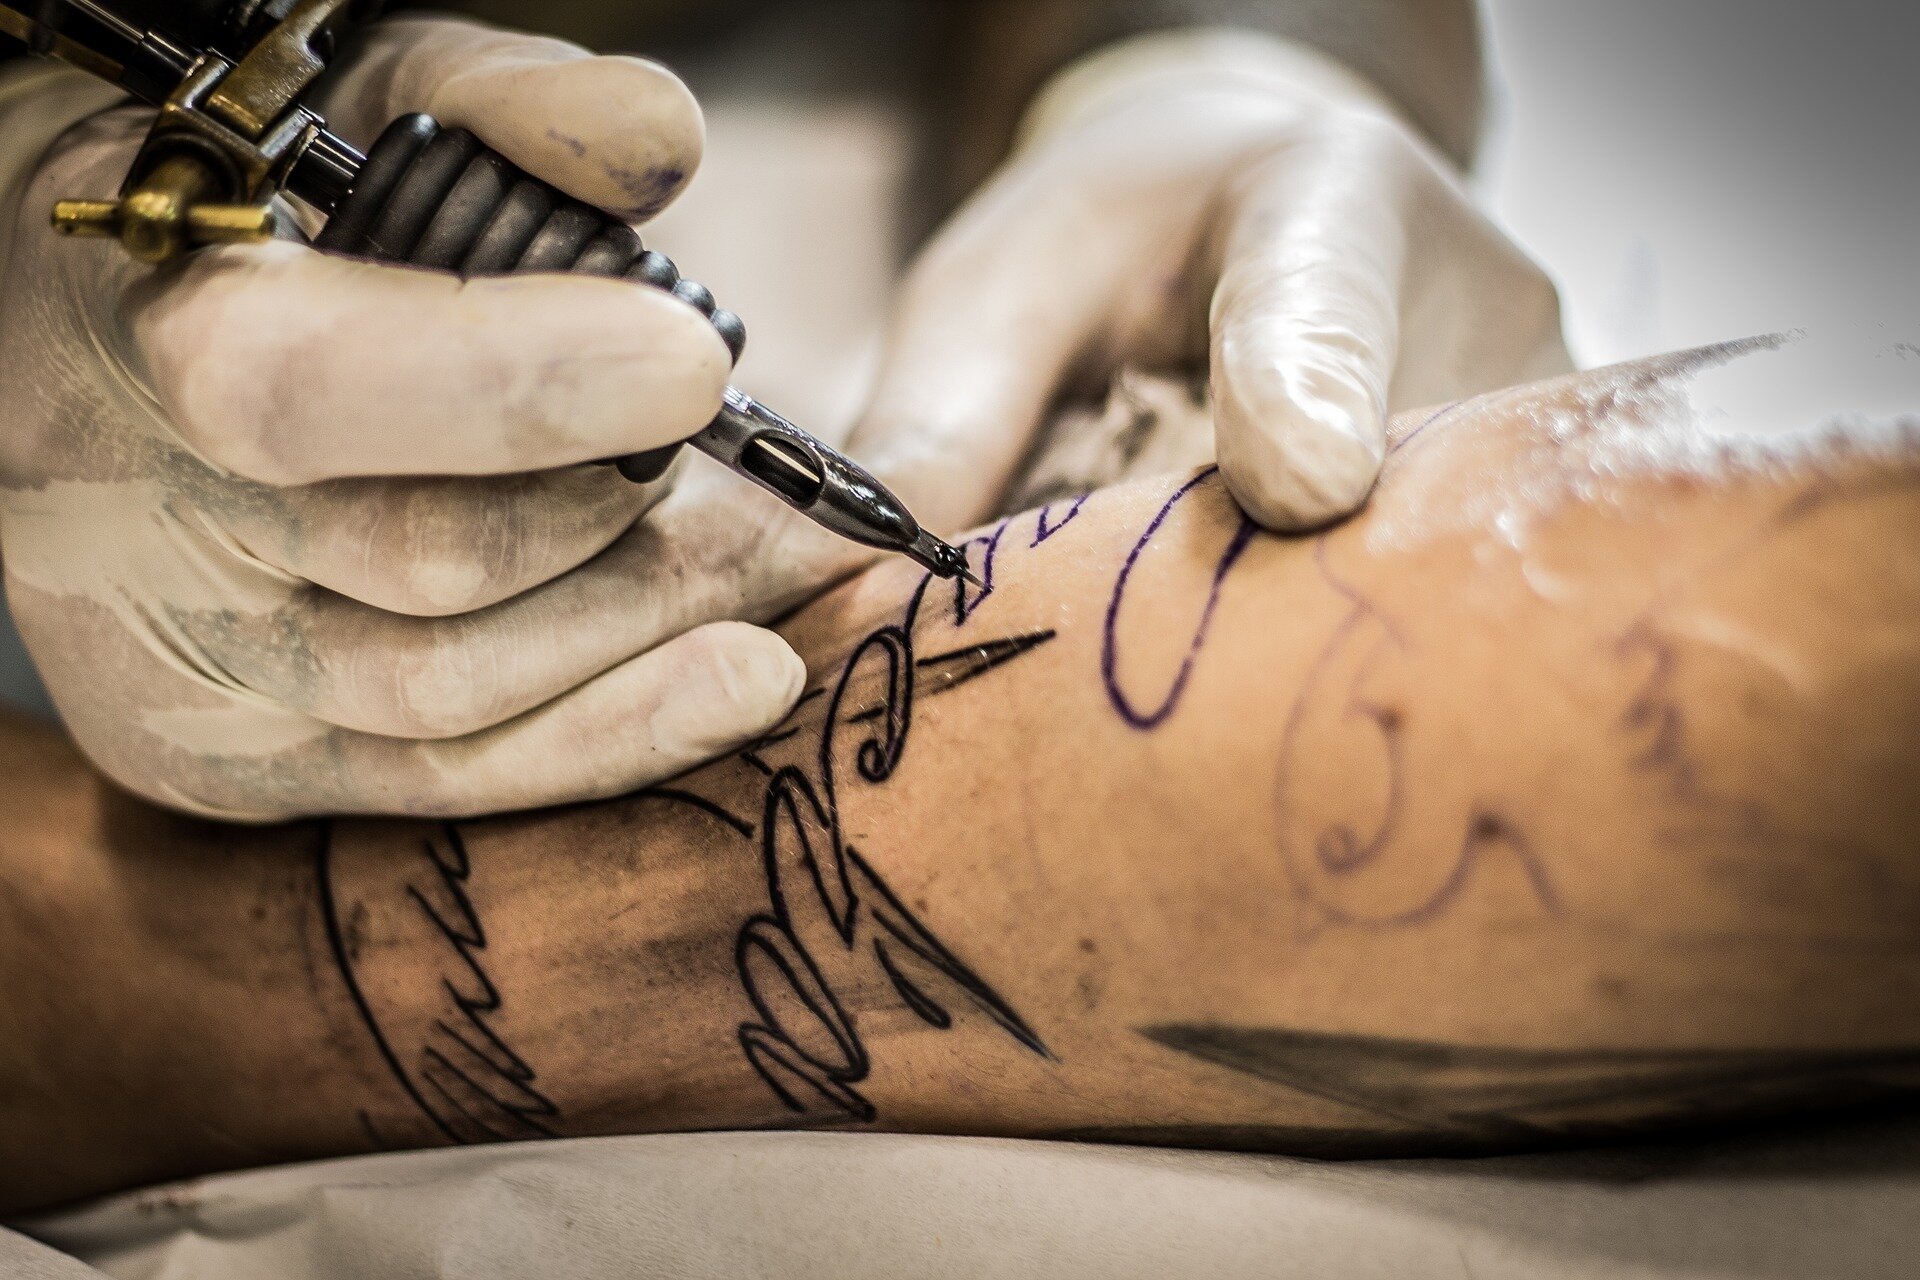 New research suggests tattoos are not a turnoff for customers